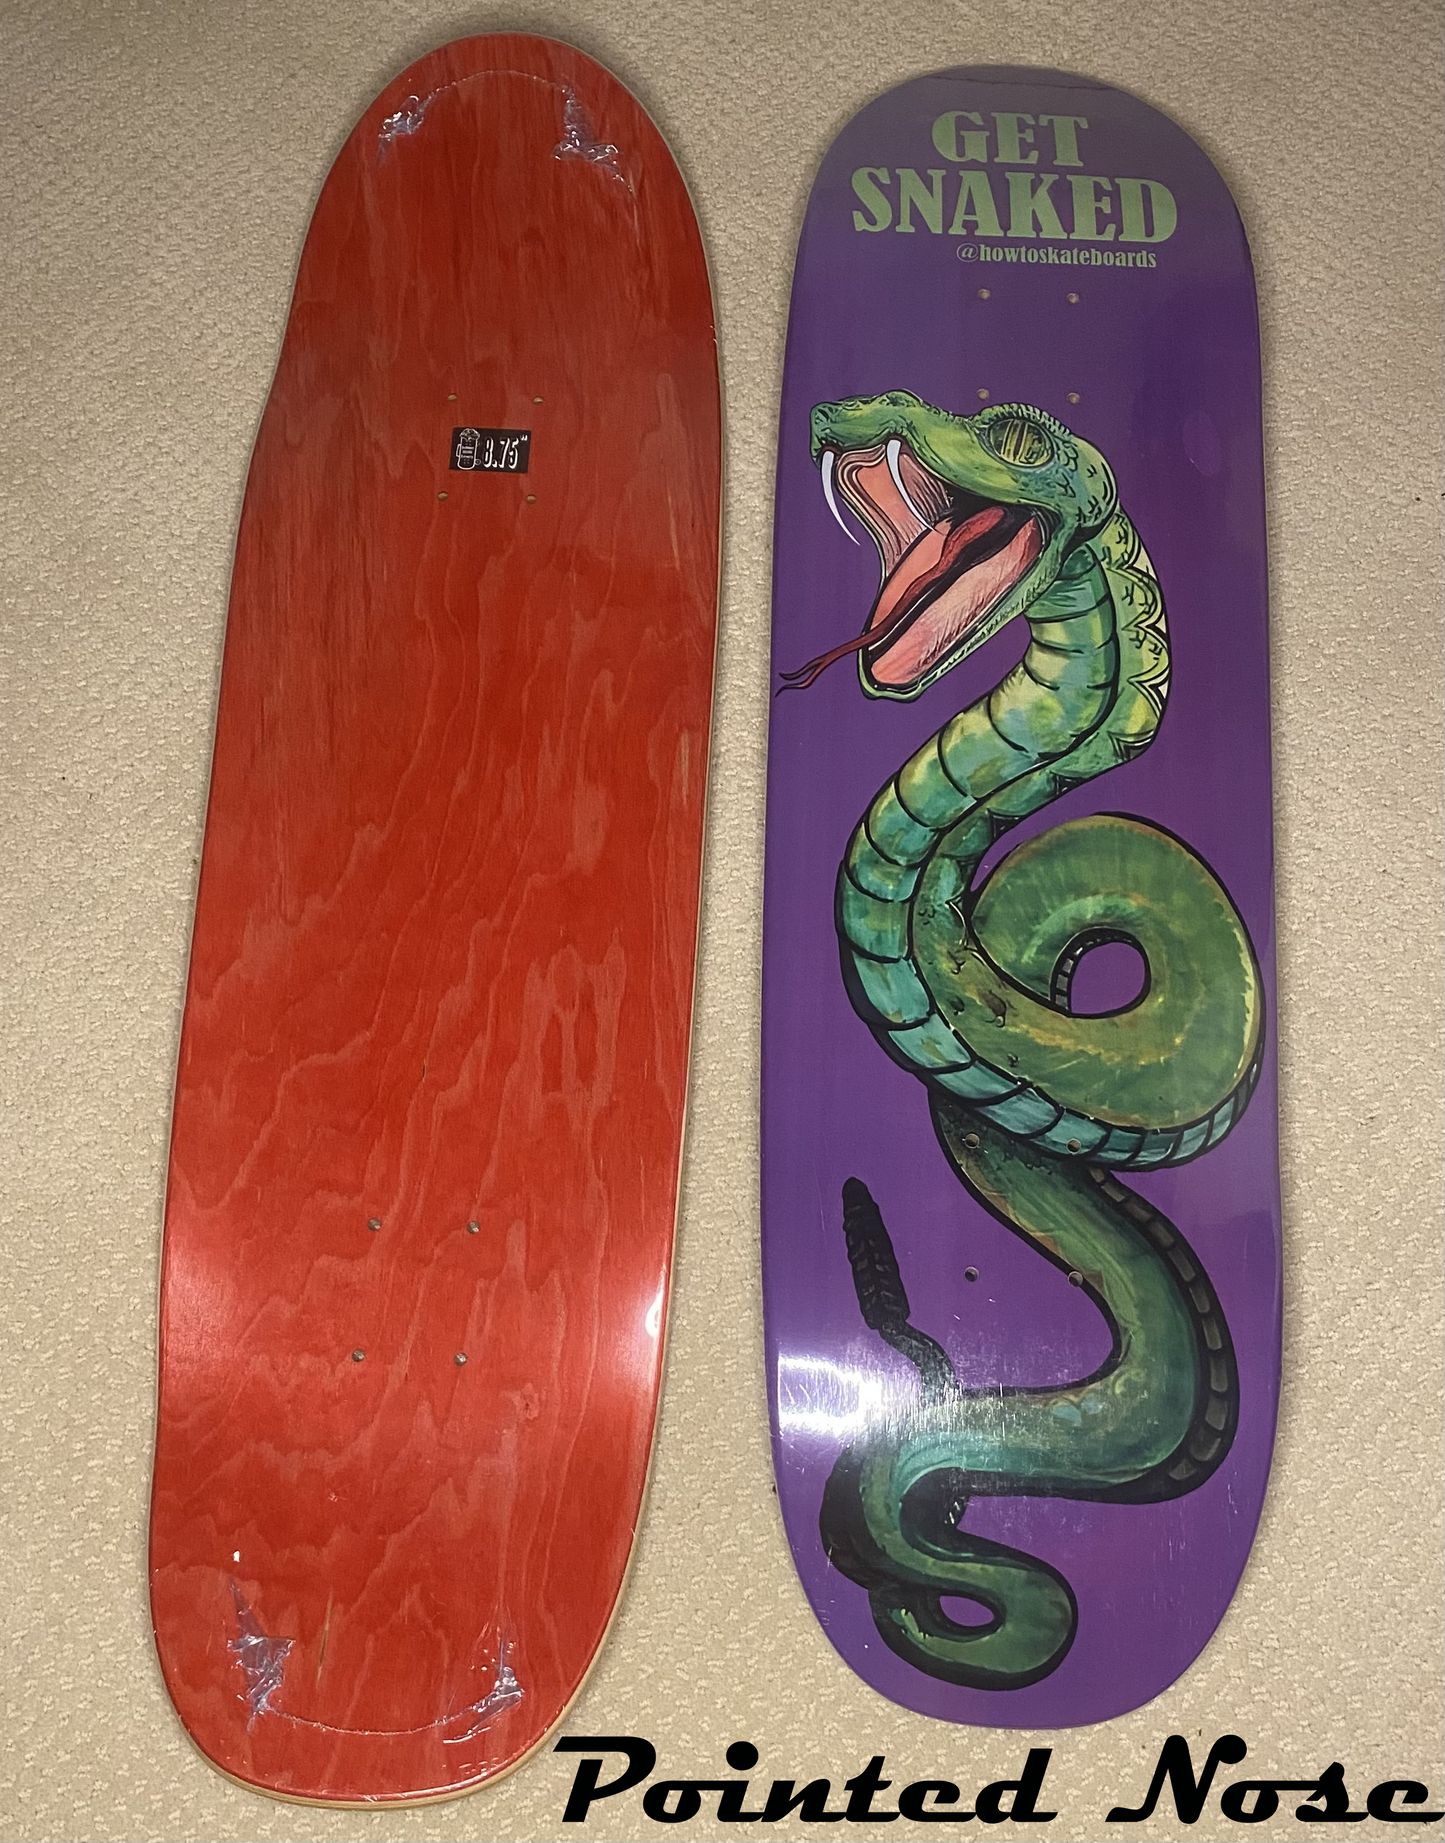 The Snake Shaped 8.75" How To Skateboards Deck